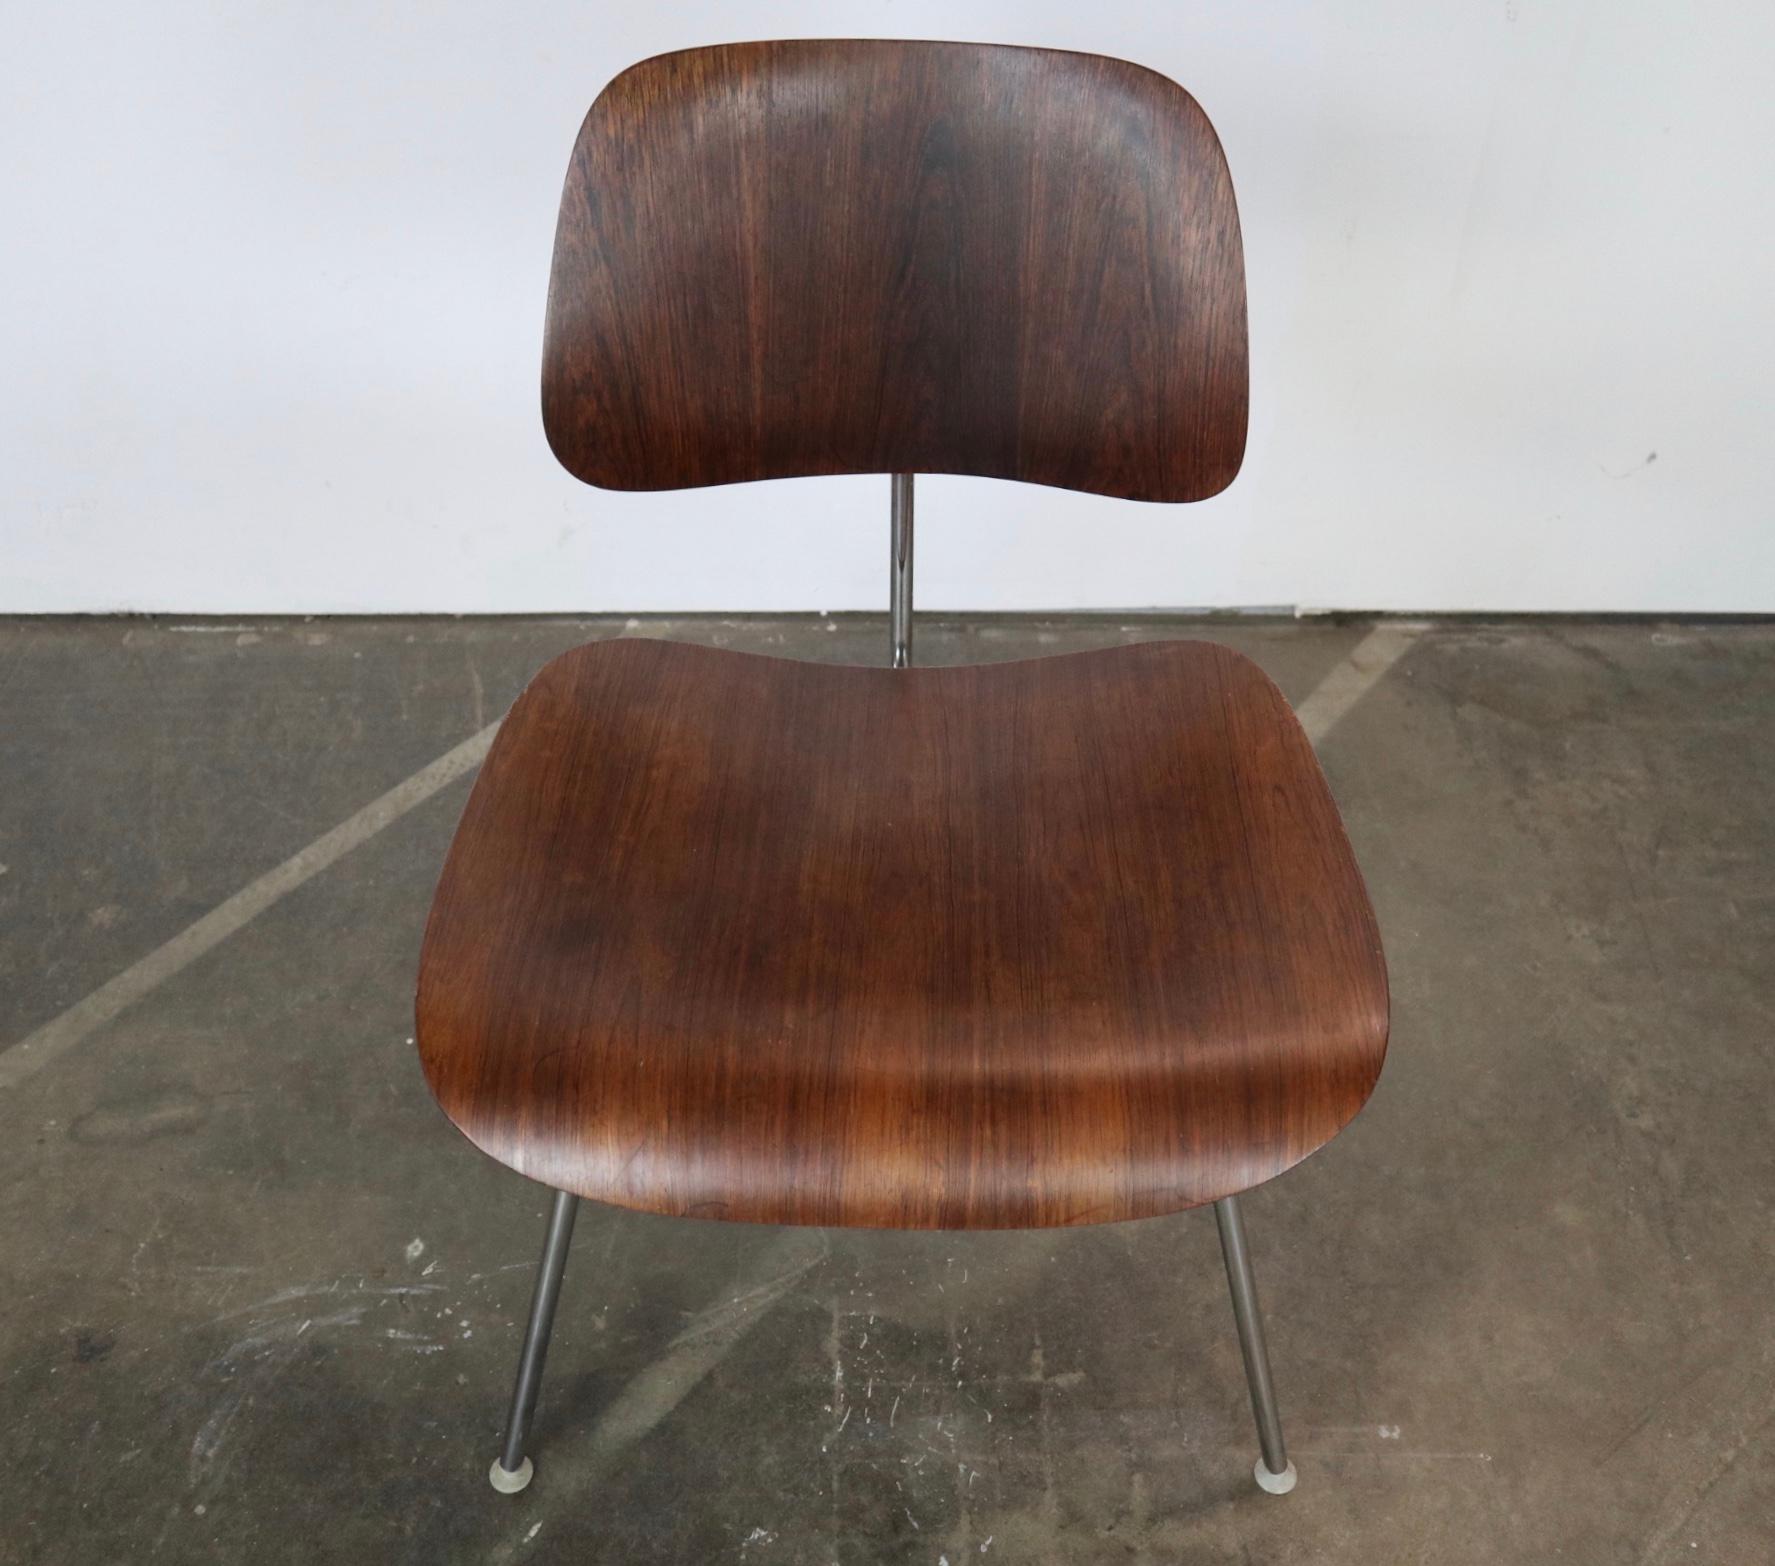 20th Century Exquisite and Rare Rosewood Herman Miller Eames DCM Dining Chair